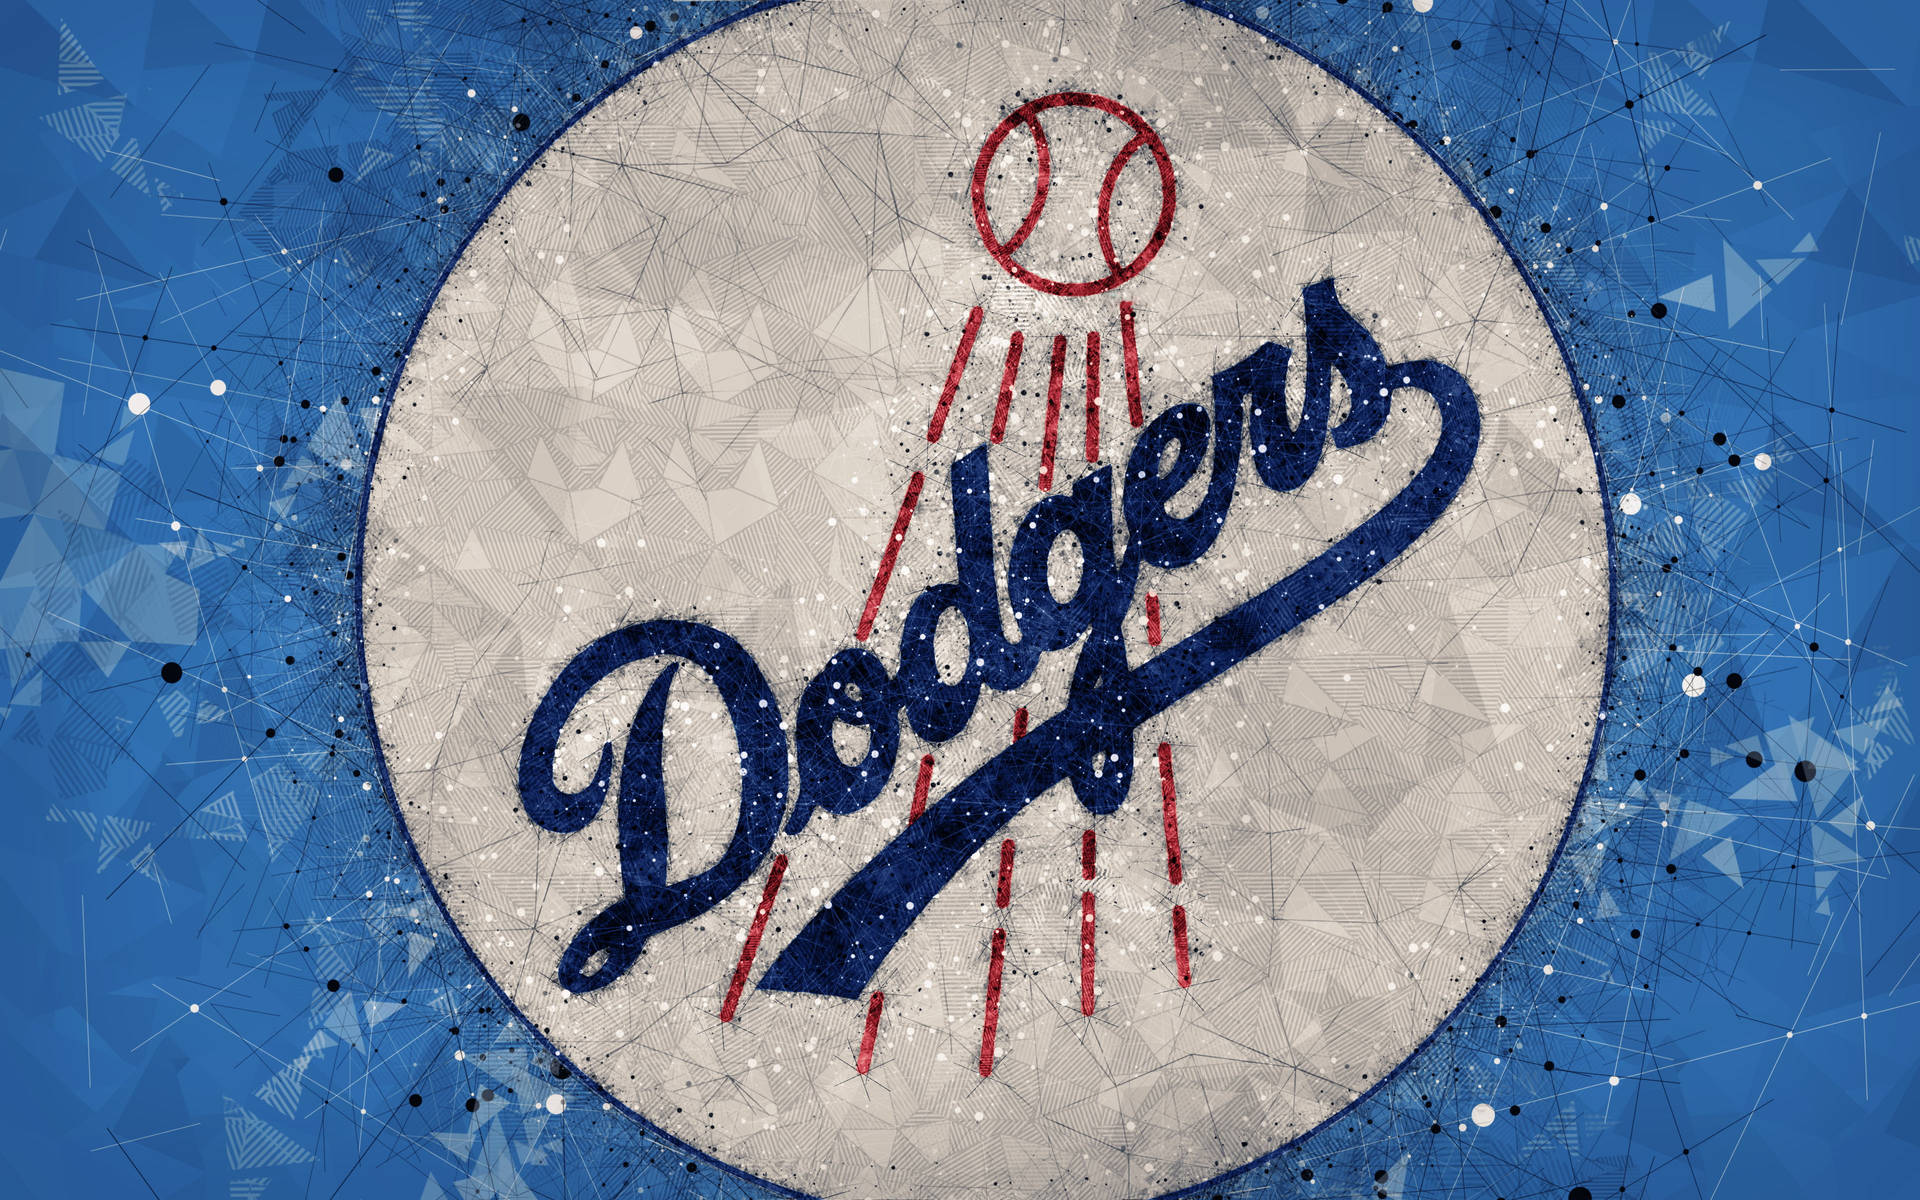 Los Angeles Dodgers Abstract Art Wallpaper